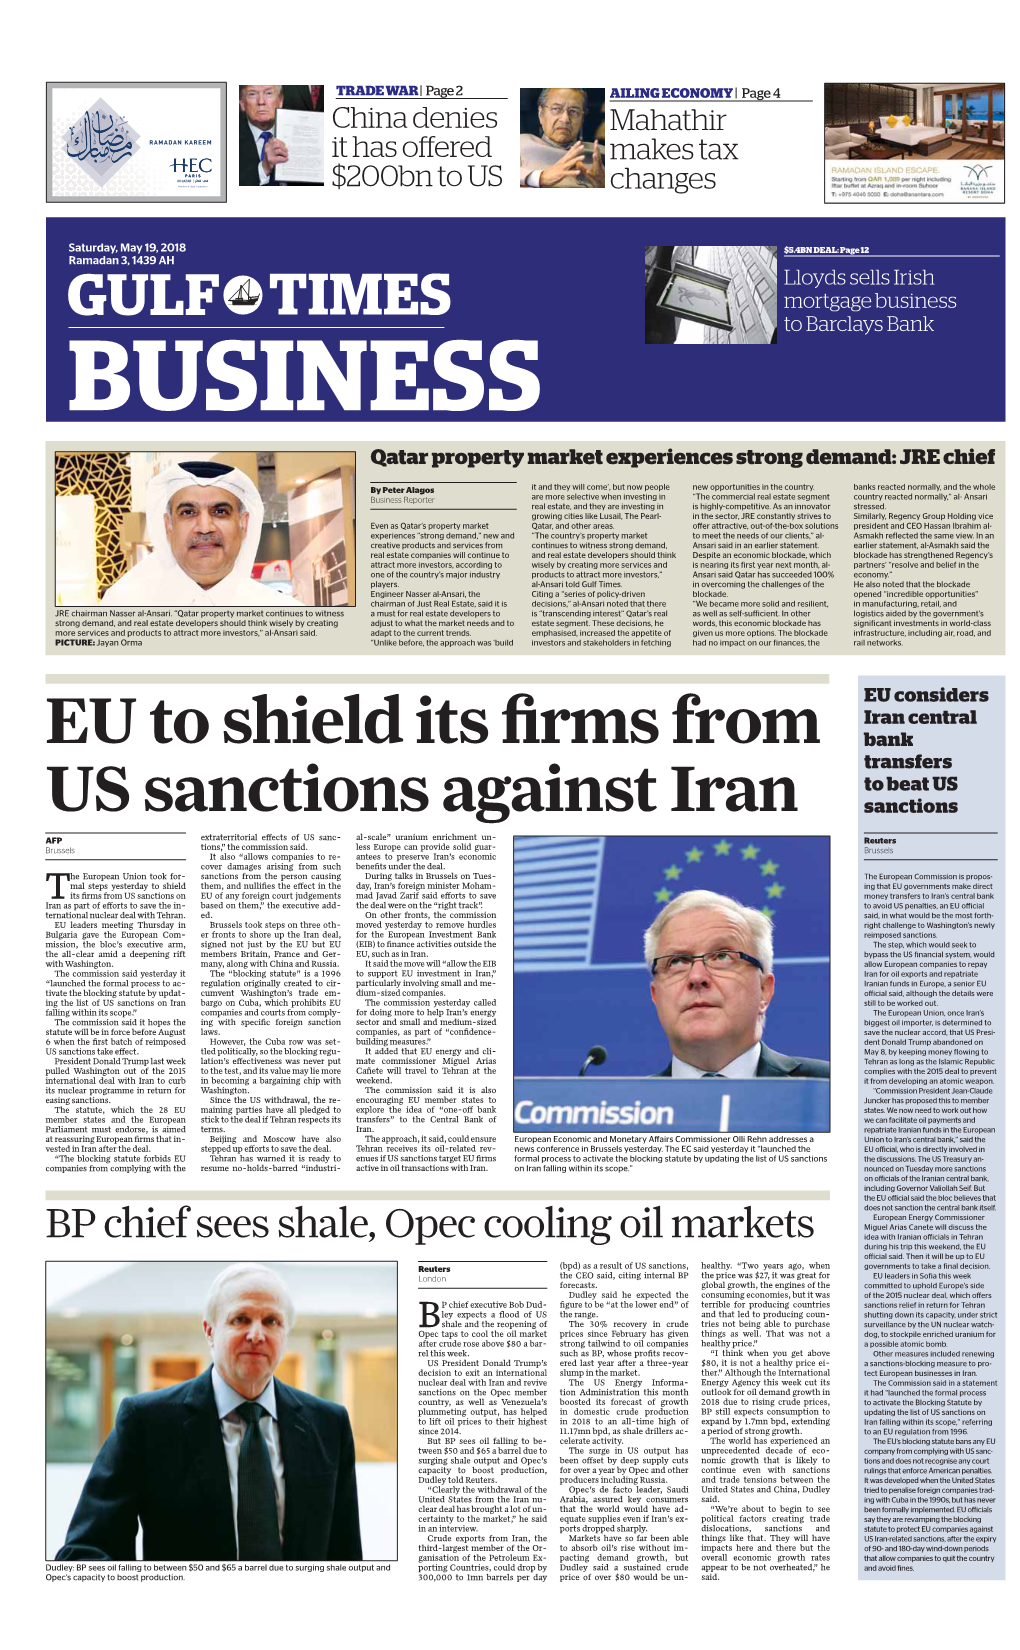 EU to Shield Its Firms from US Sanctions Against Iran